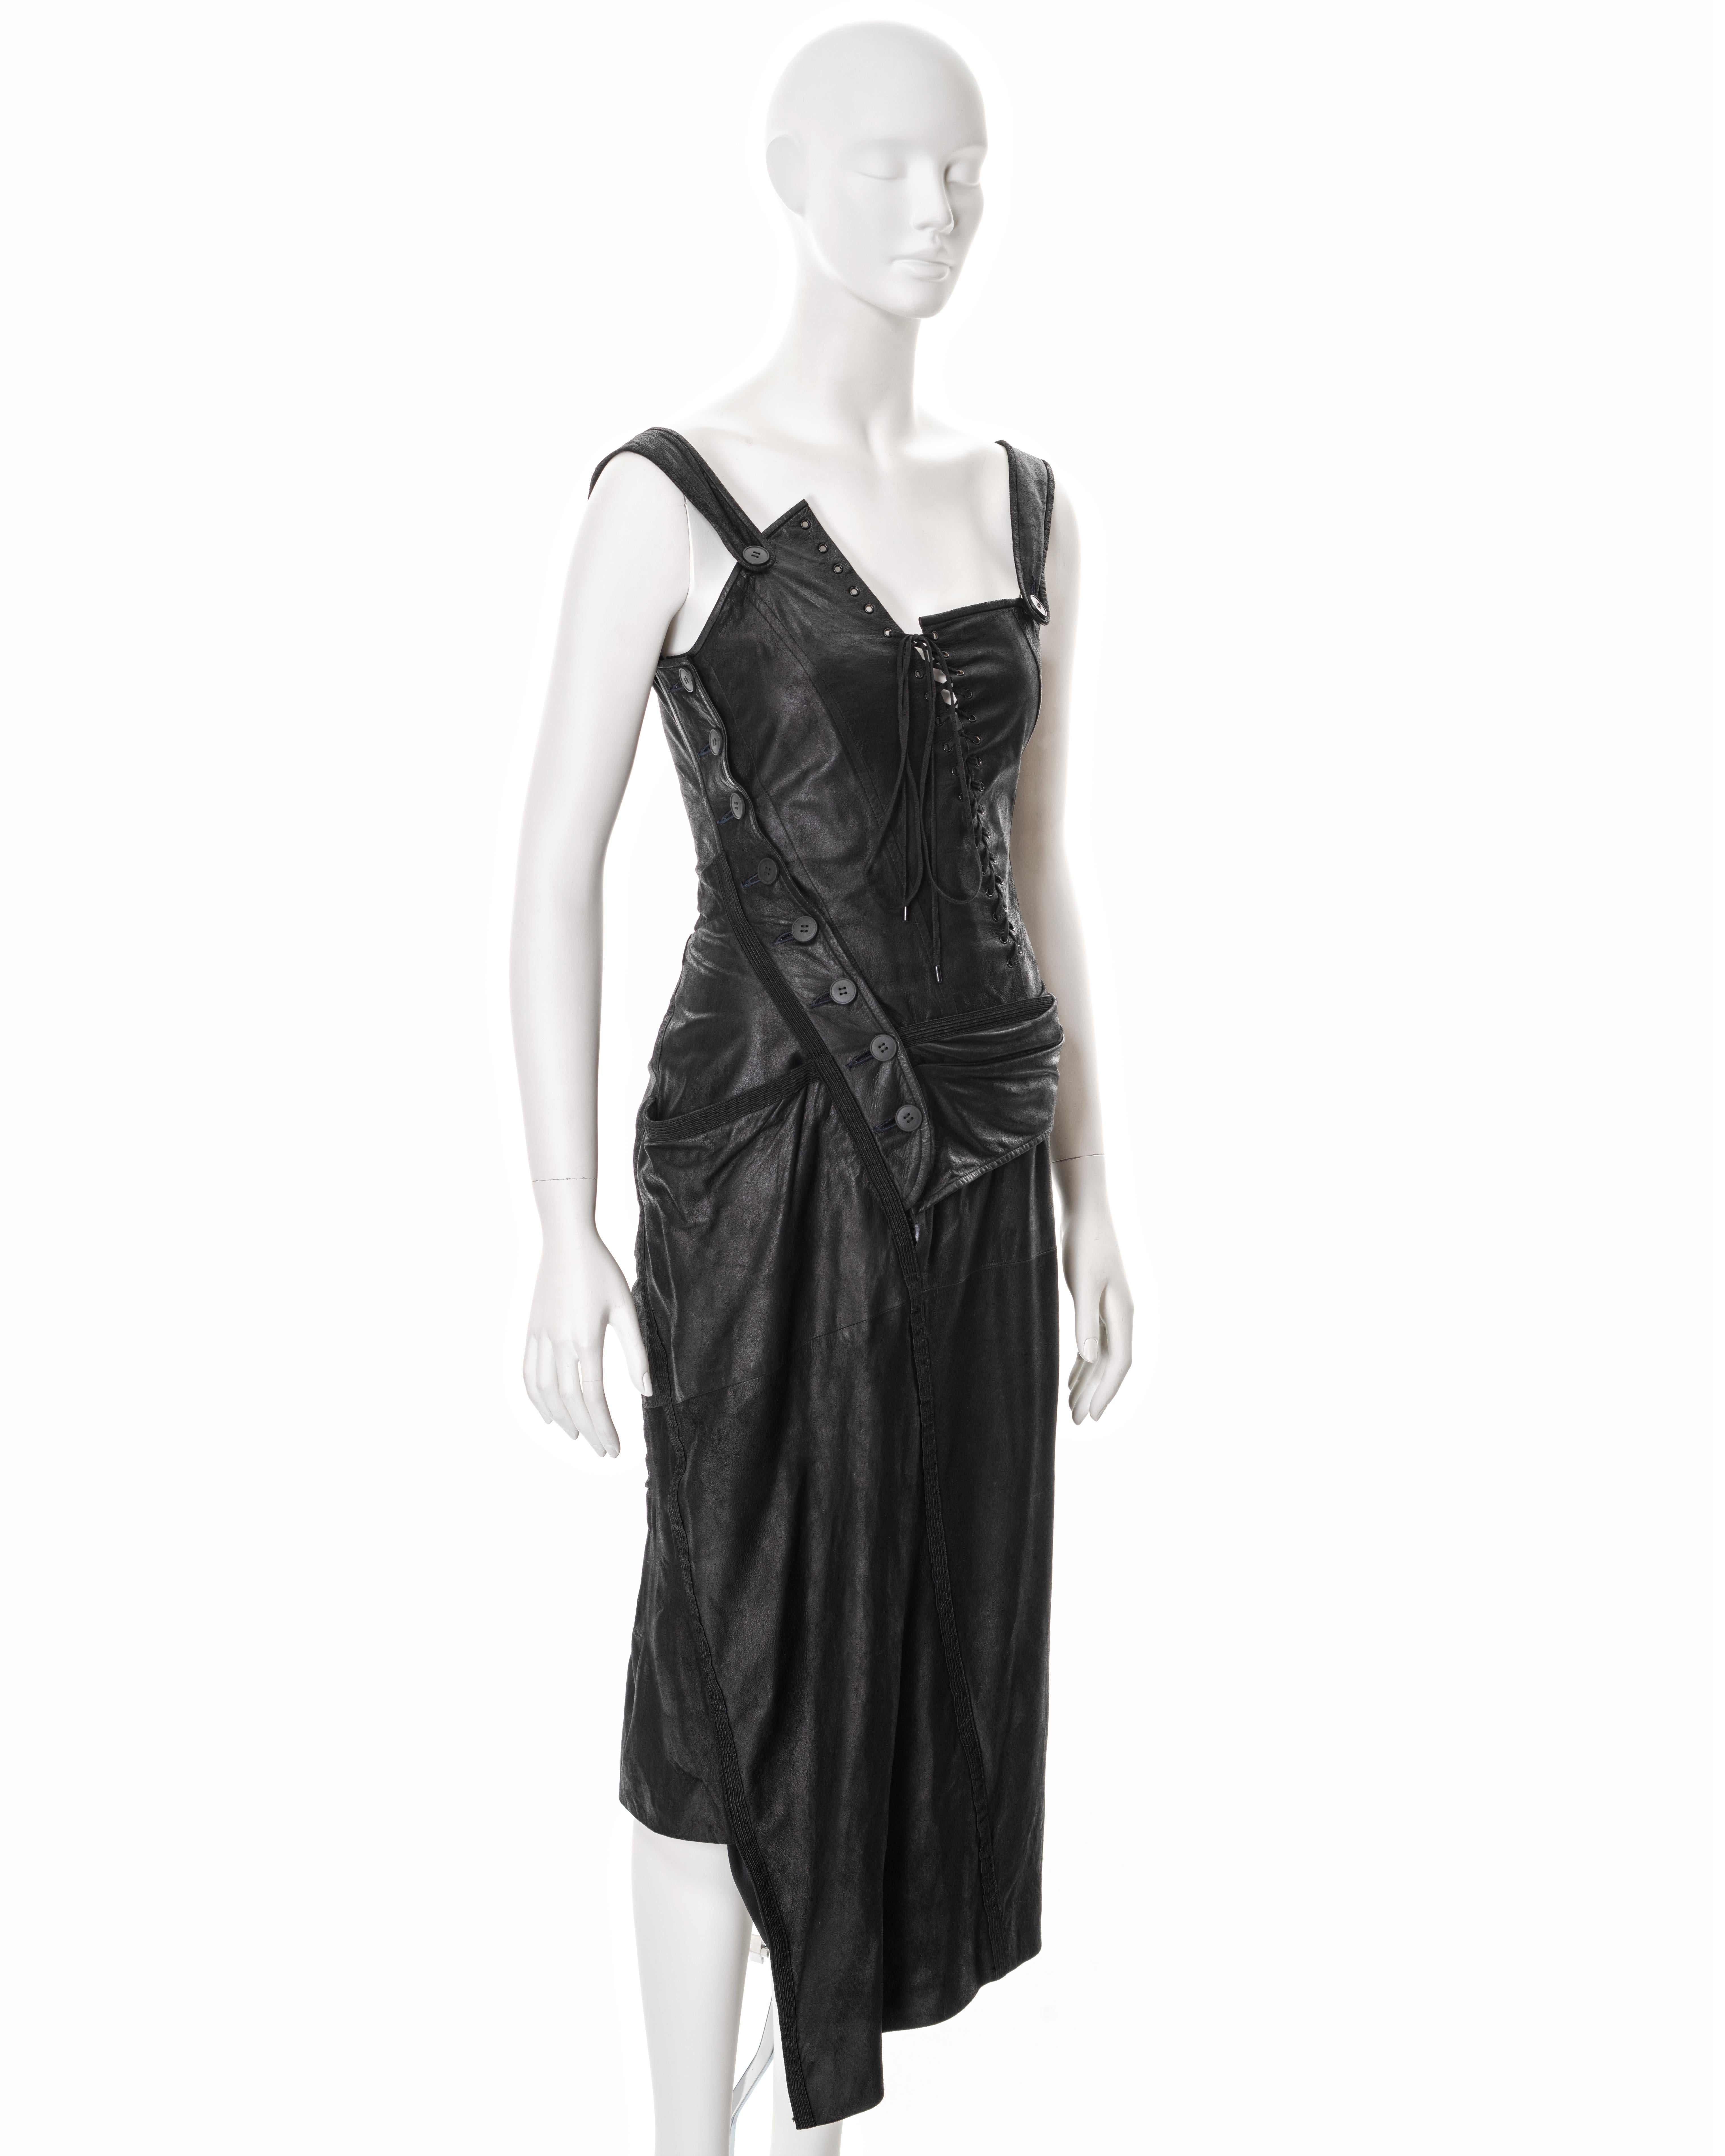 Women's Christian Dior by John Galliano black leather deconstructed dress, ss 2000